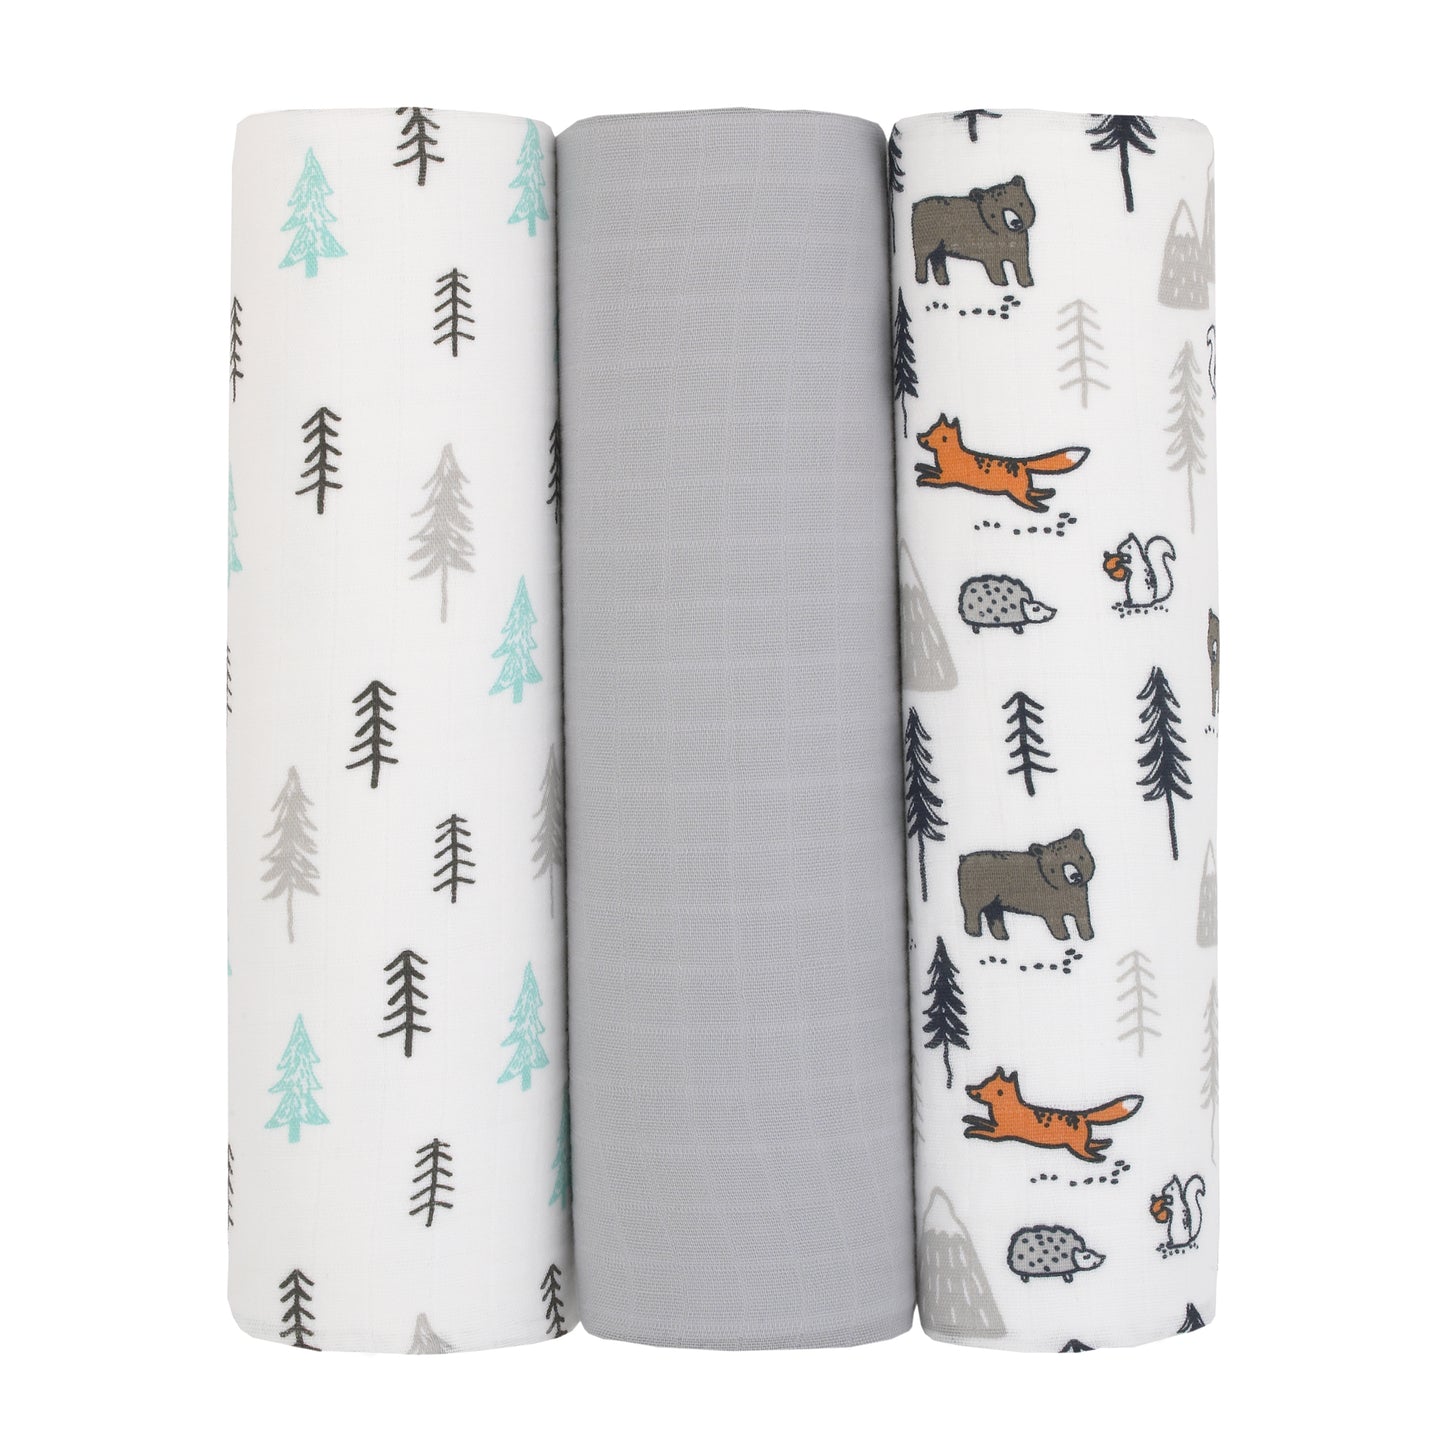 Carter's Woodland Friends Gray and White Tree Bear Squirrel 100% Cotton 3 Pack Muslin Swaddle Blankets